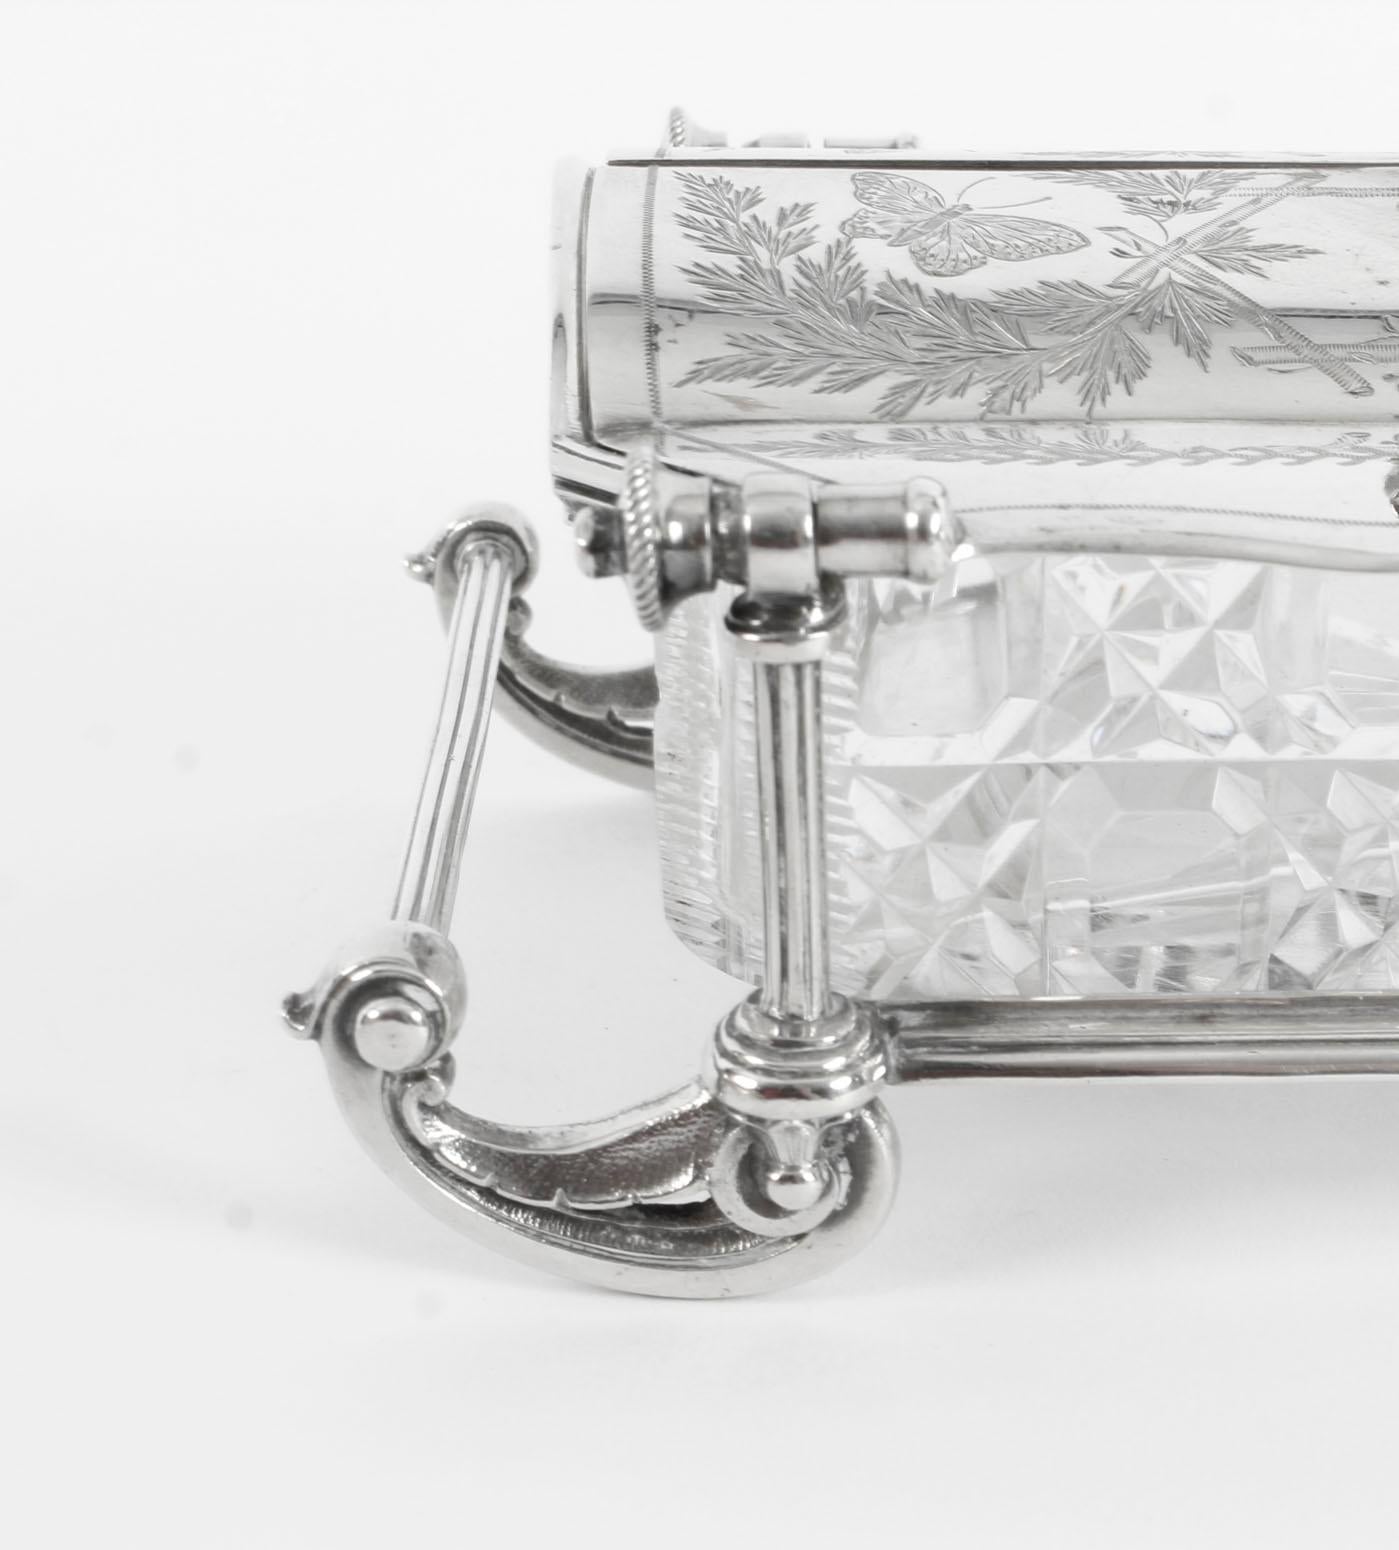 Elkington & Co English Silver Plated and Cut Glass Butter Dish, 19th Century 2